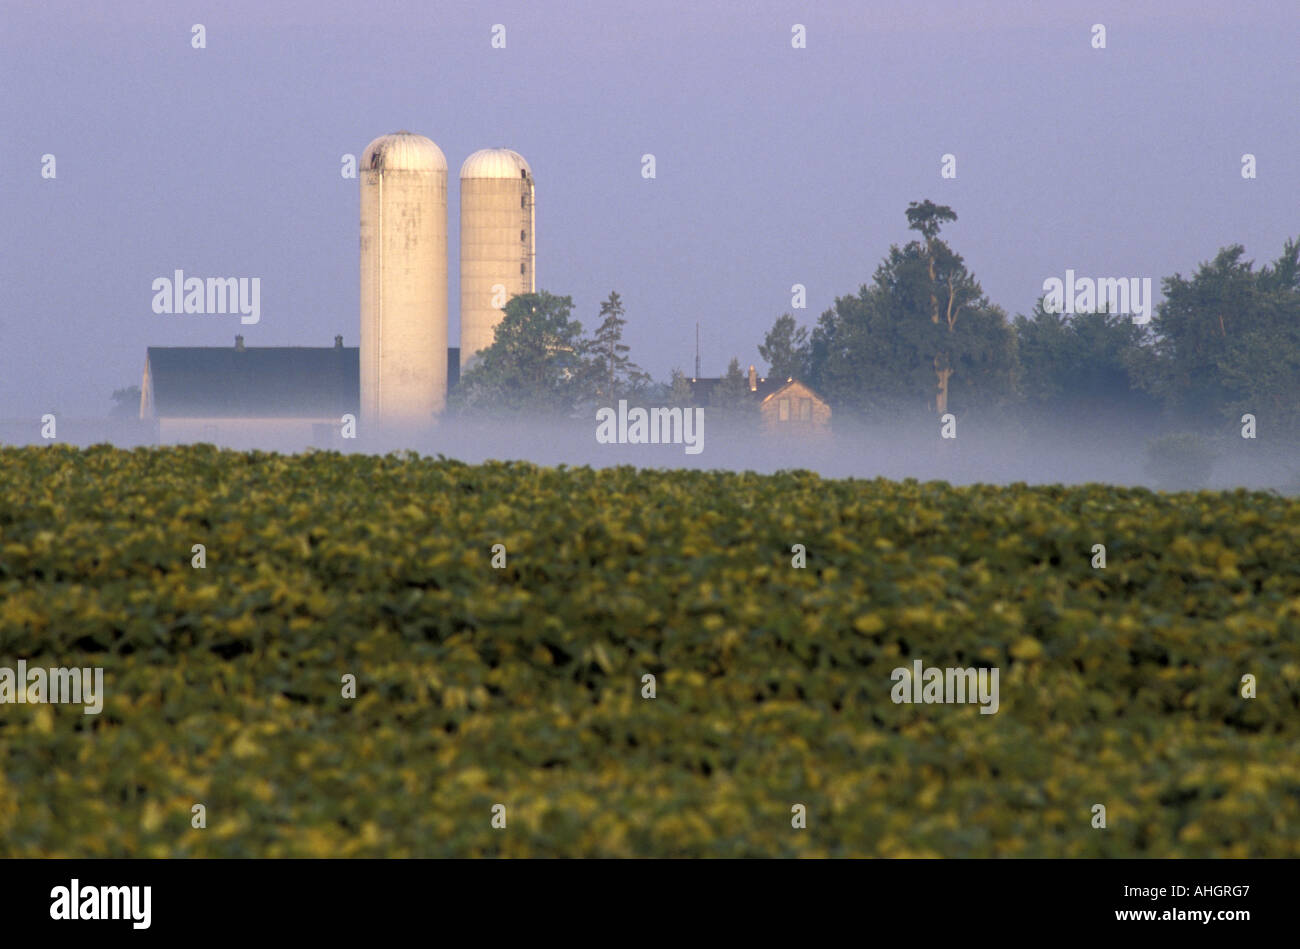 Southern Ontario Farm and Soy Bean Field In Mist Stock Photo